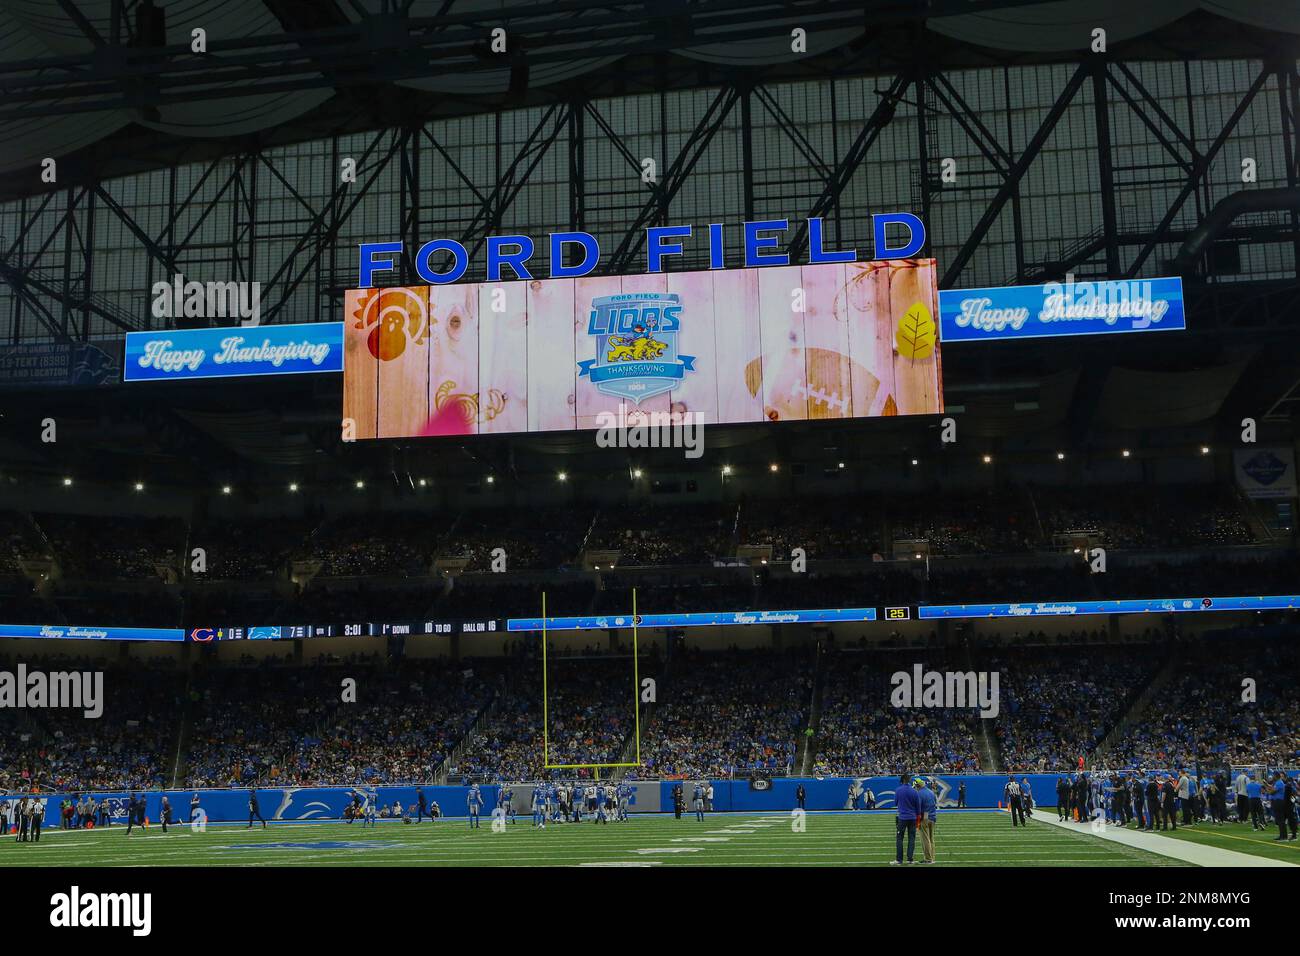 DETROIT, MI - NOVEMBER 25: A general view of the video scoreboard  displaying the Happy Thanksgiving message is seen during a regular season  Thanksgiving Day NFL football game between the Chicago Bears